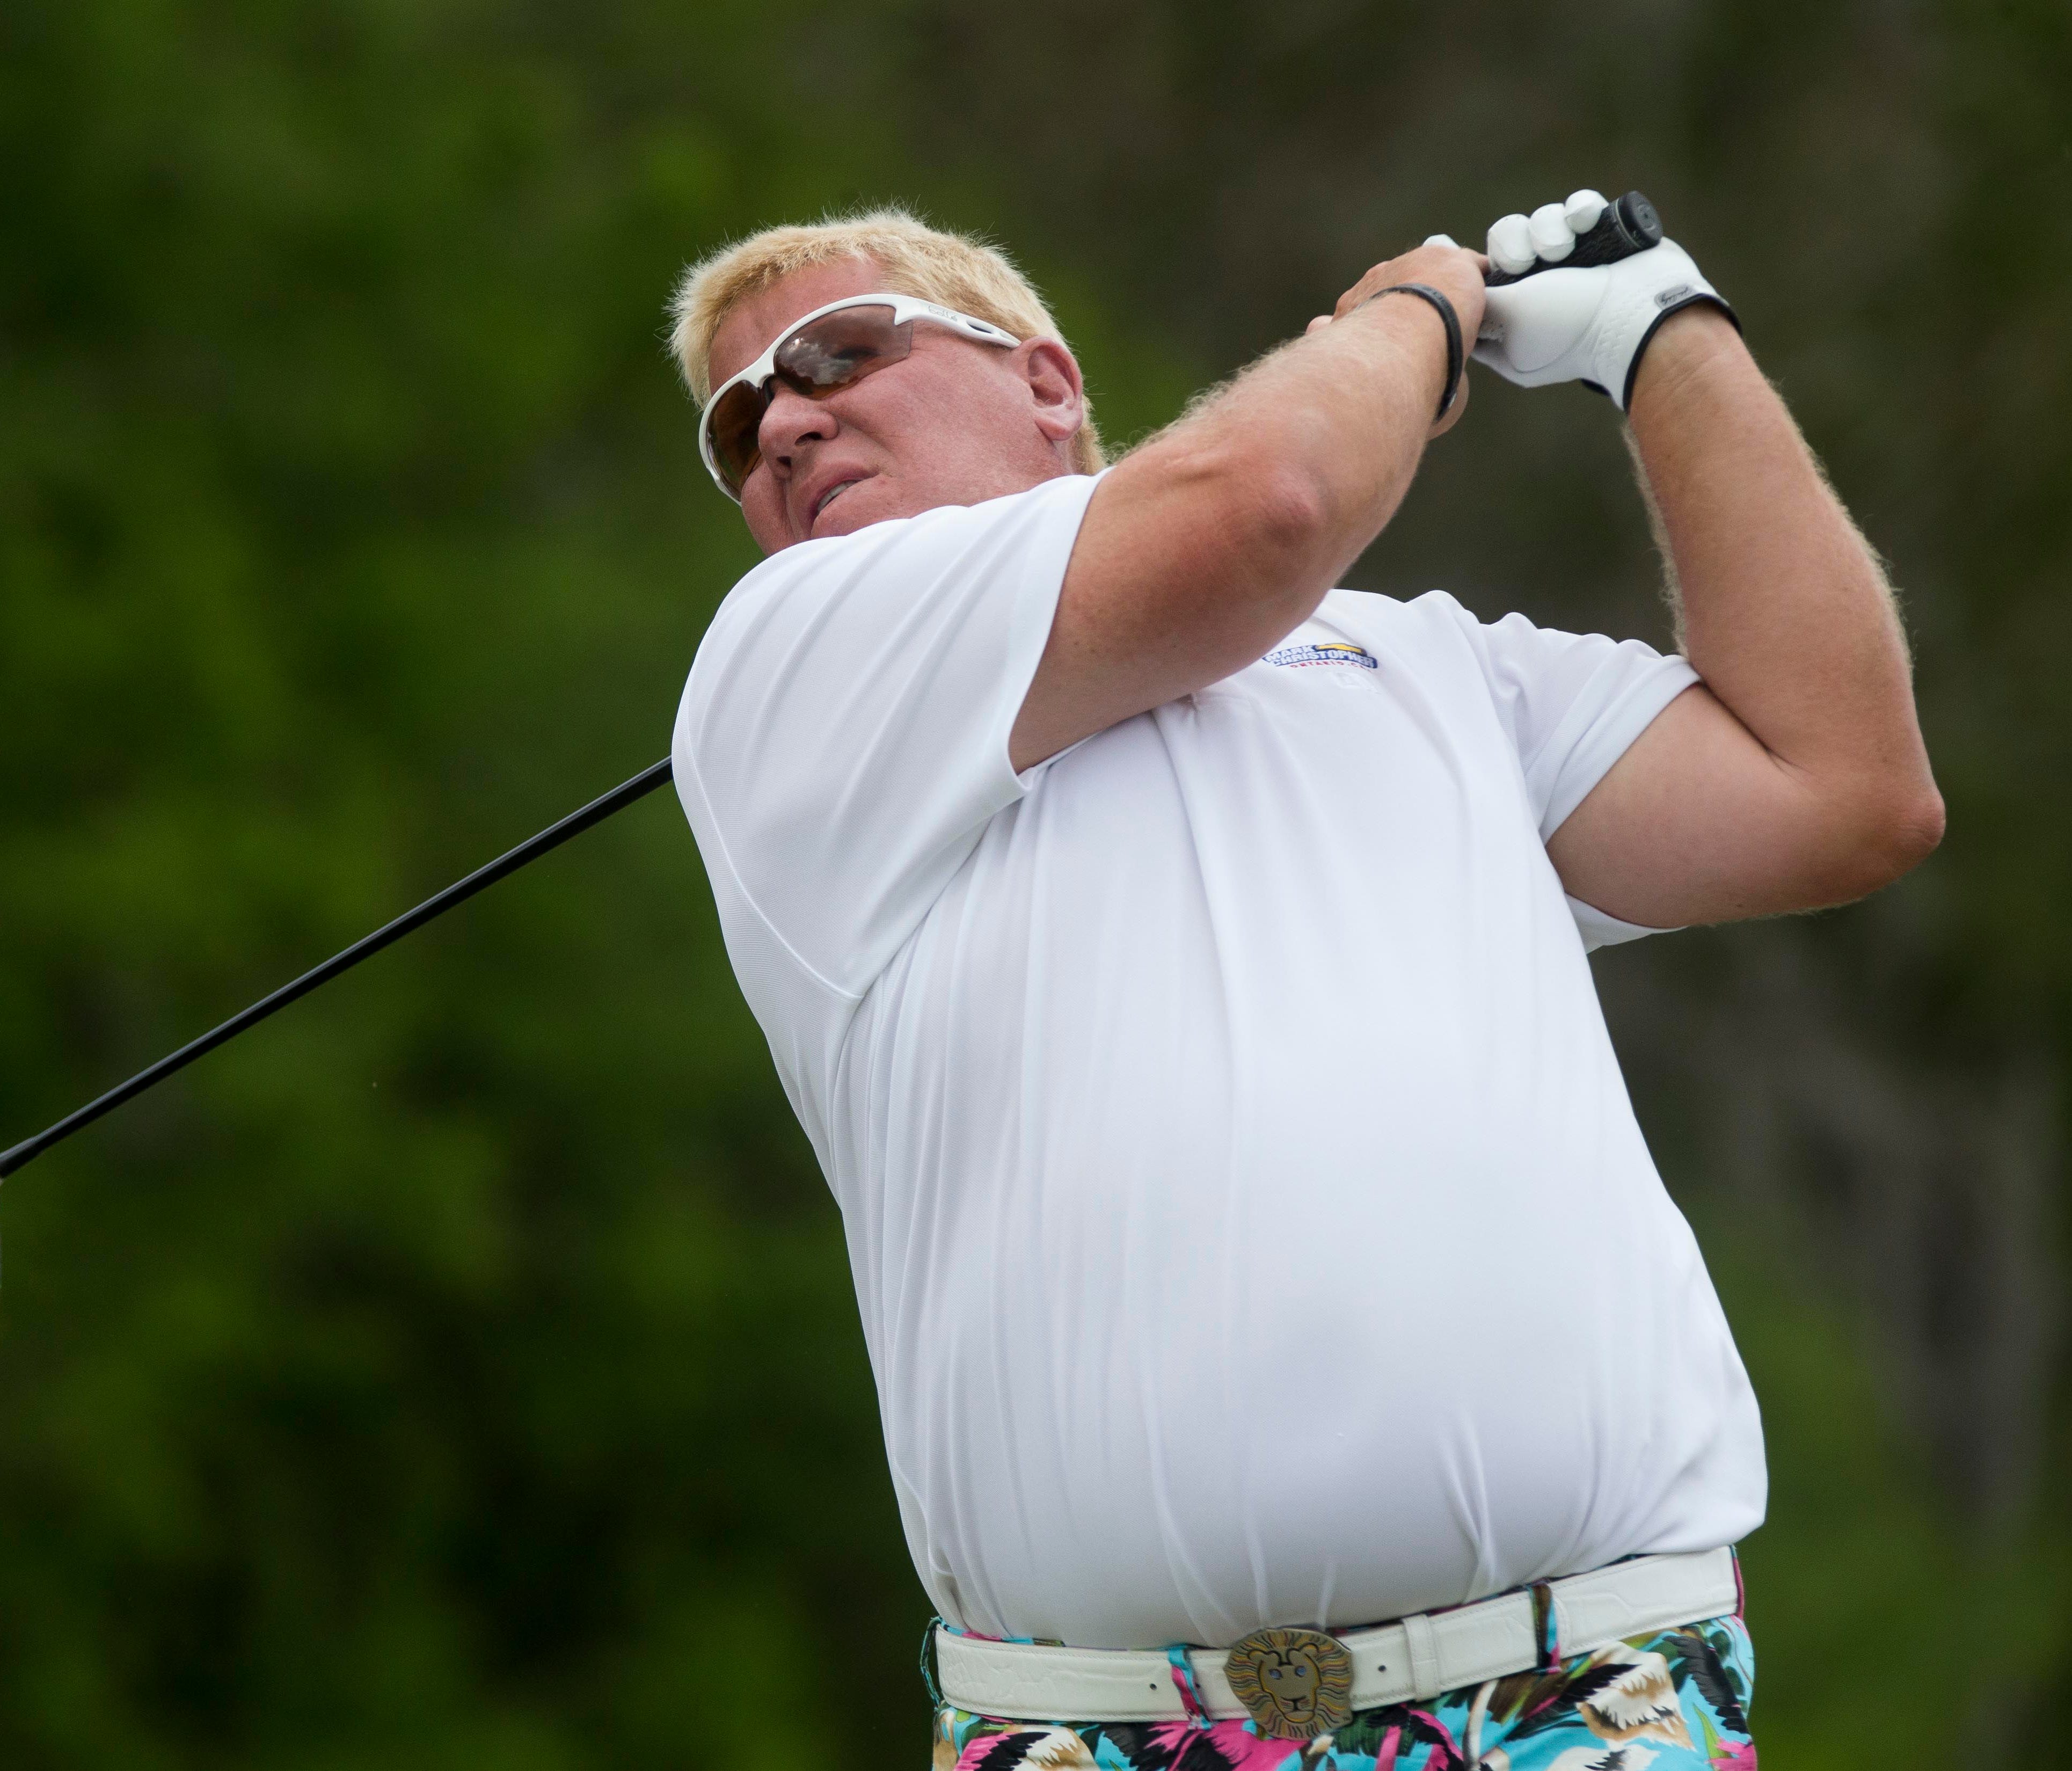 This photo from February 2017 shows John Daly during the second round of The Chubb Classic at TwinEagles Club in Naples, Fla.